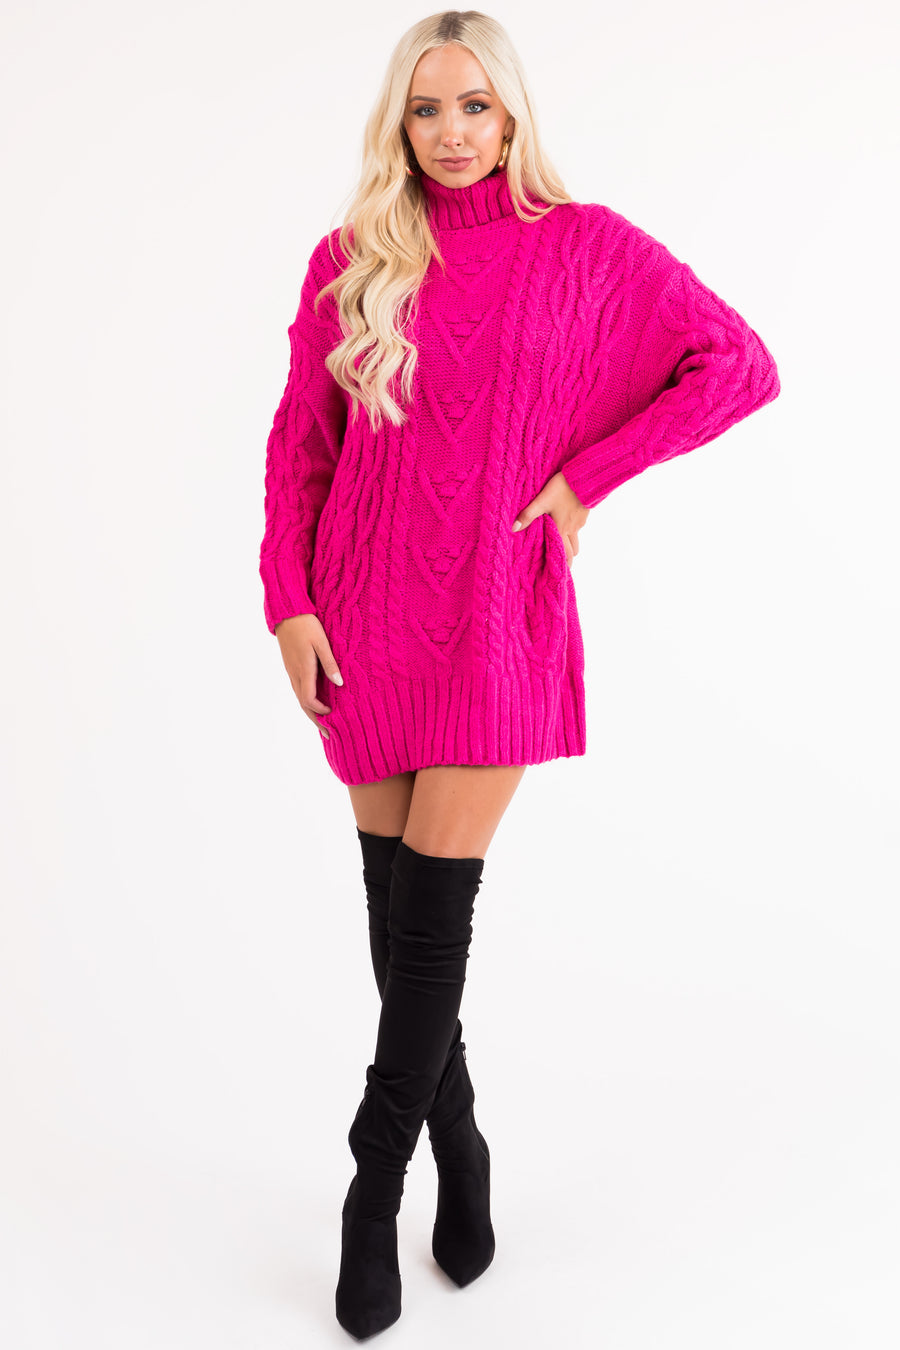 Magenta Cable Knit Turtleneck Sweater Dress